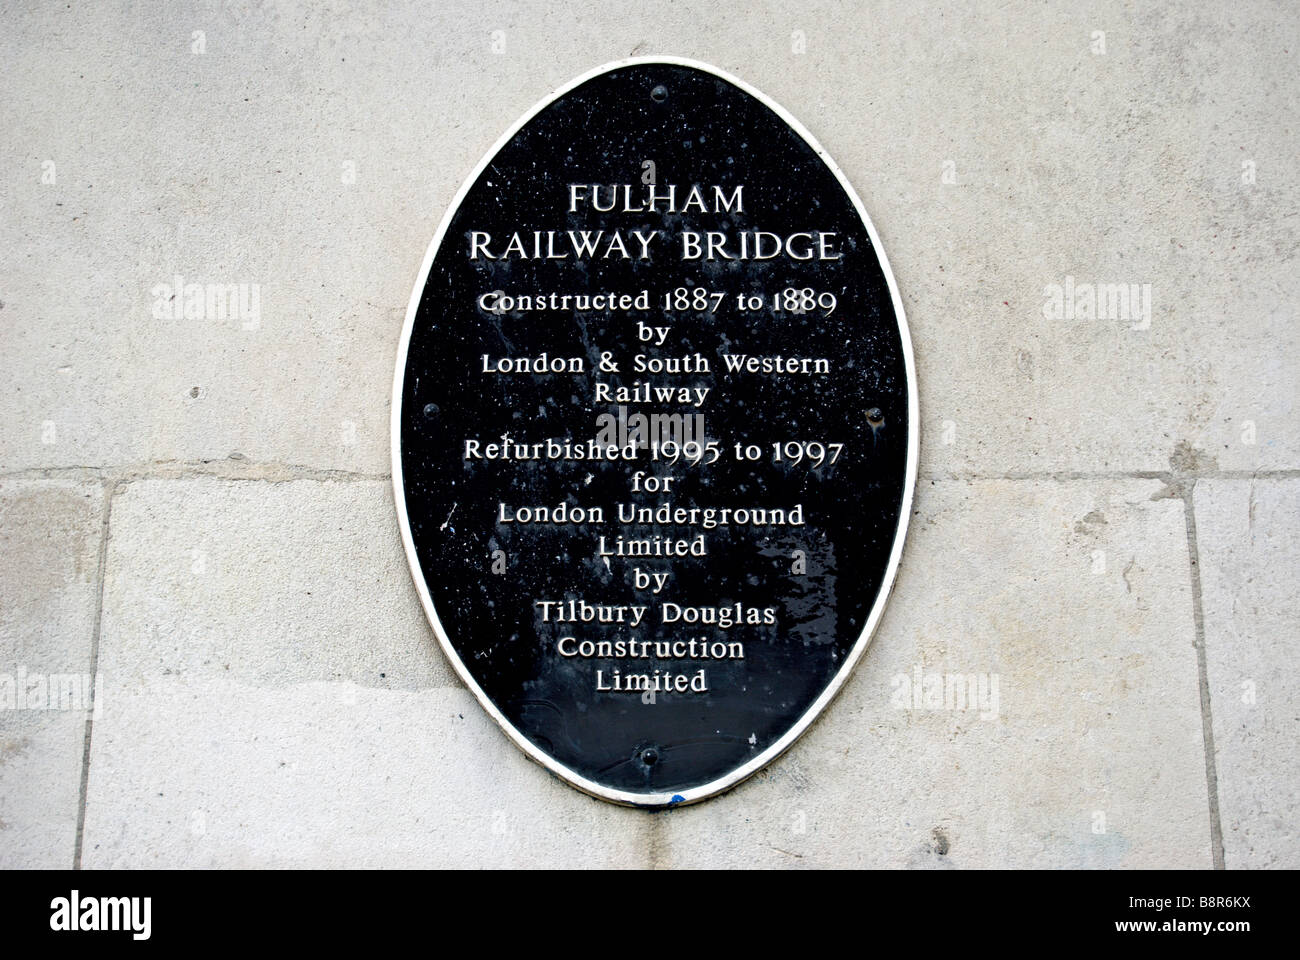 plaque on fulham railway bridge, crossing the river thames in london, detailing construction and refurbishment details Stock Photo